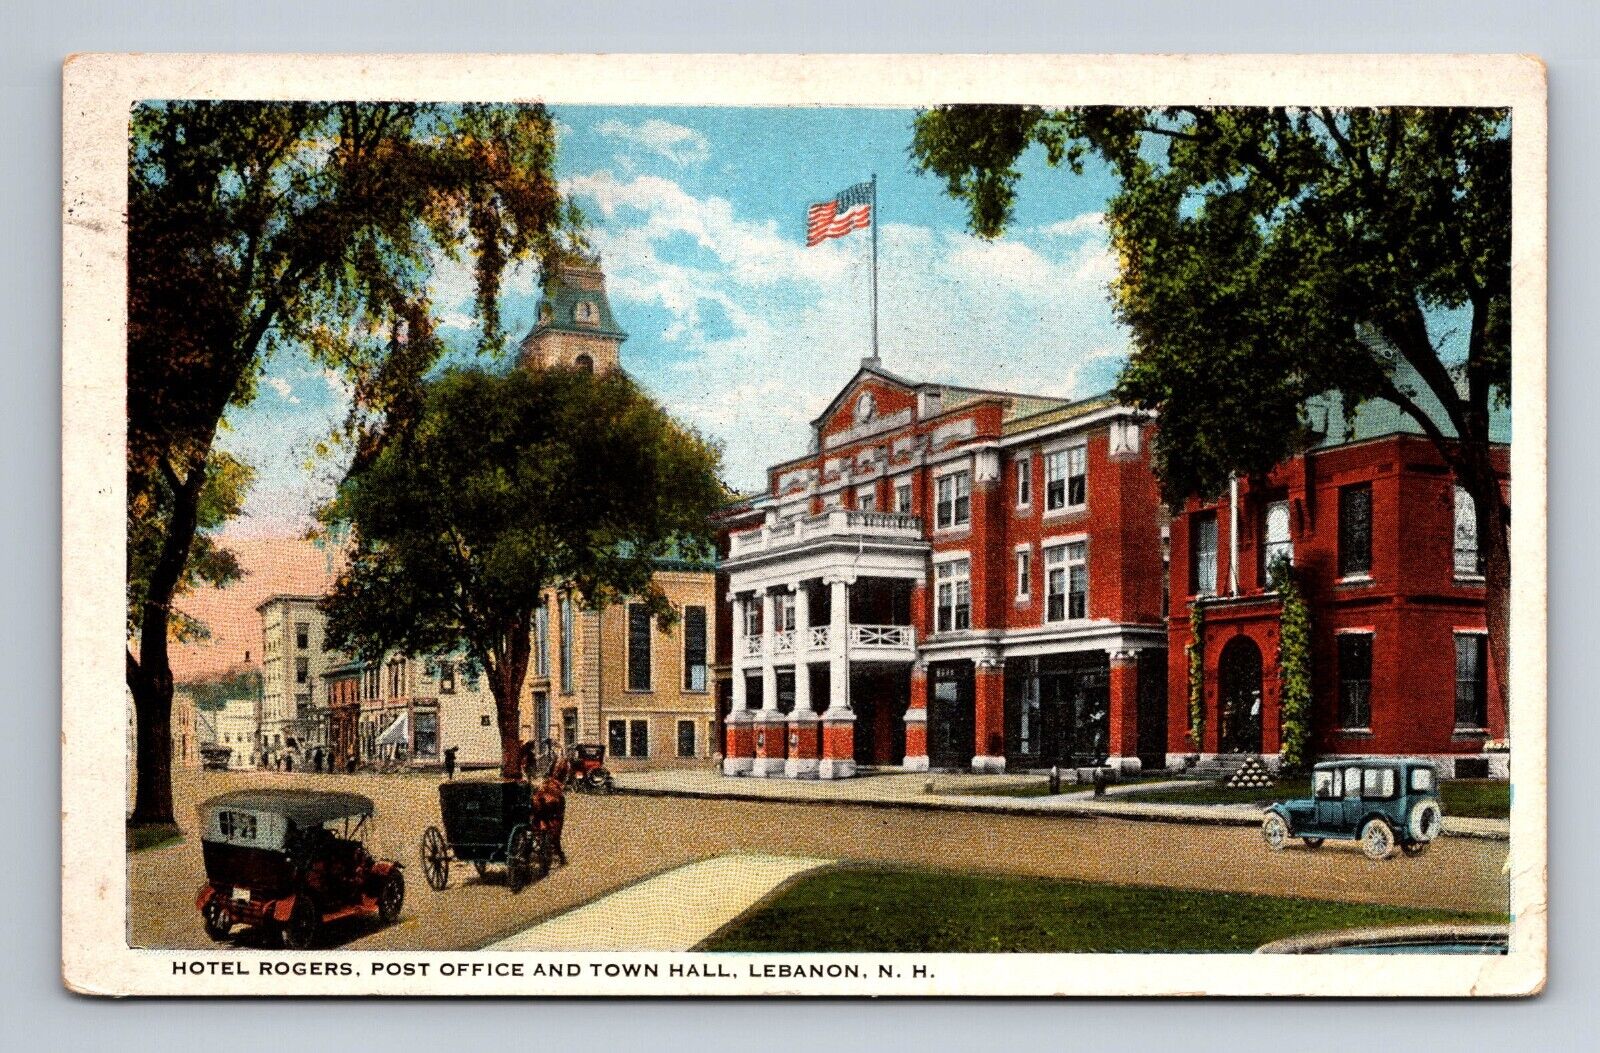 Hotel Rogers Post Office and Town Hall Lebanon New Hampshire Postcard